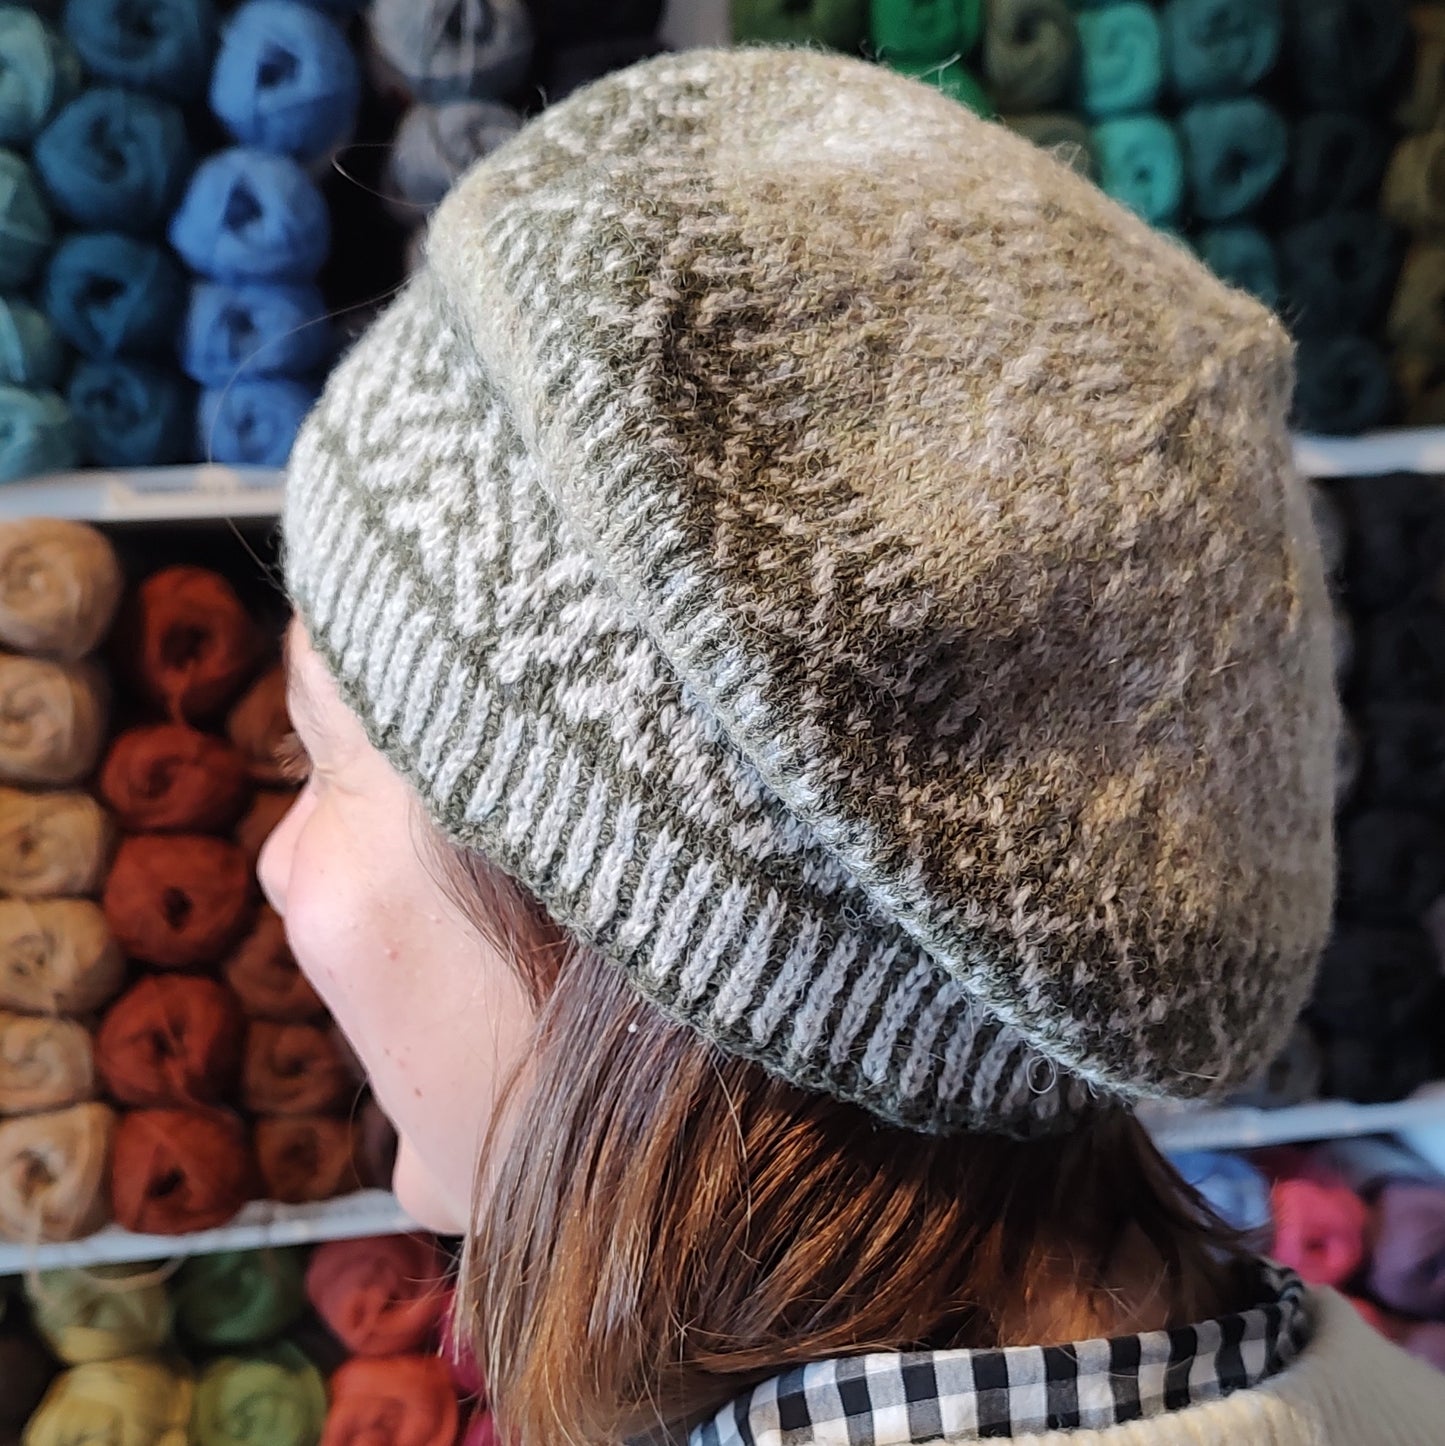 Knitted Hat - colourwork beret in greens and neutrals